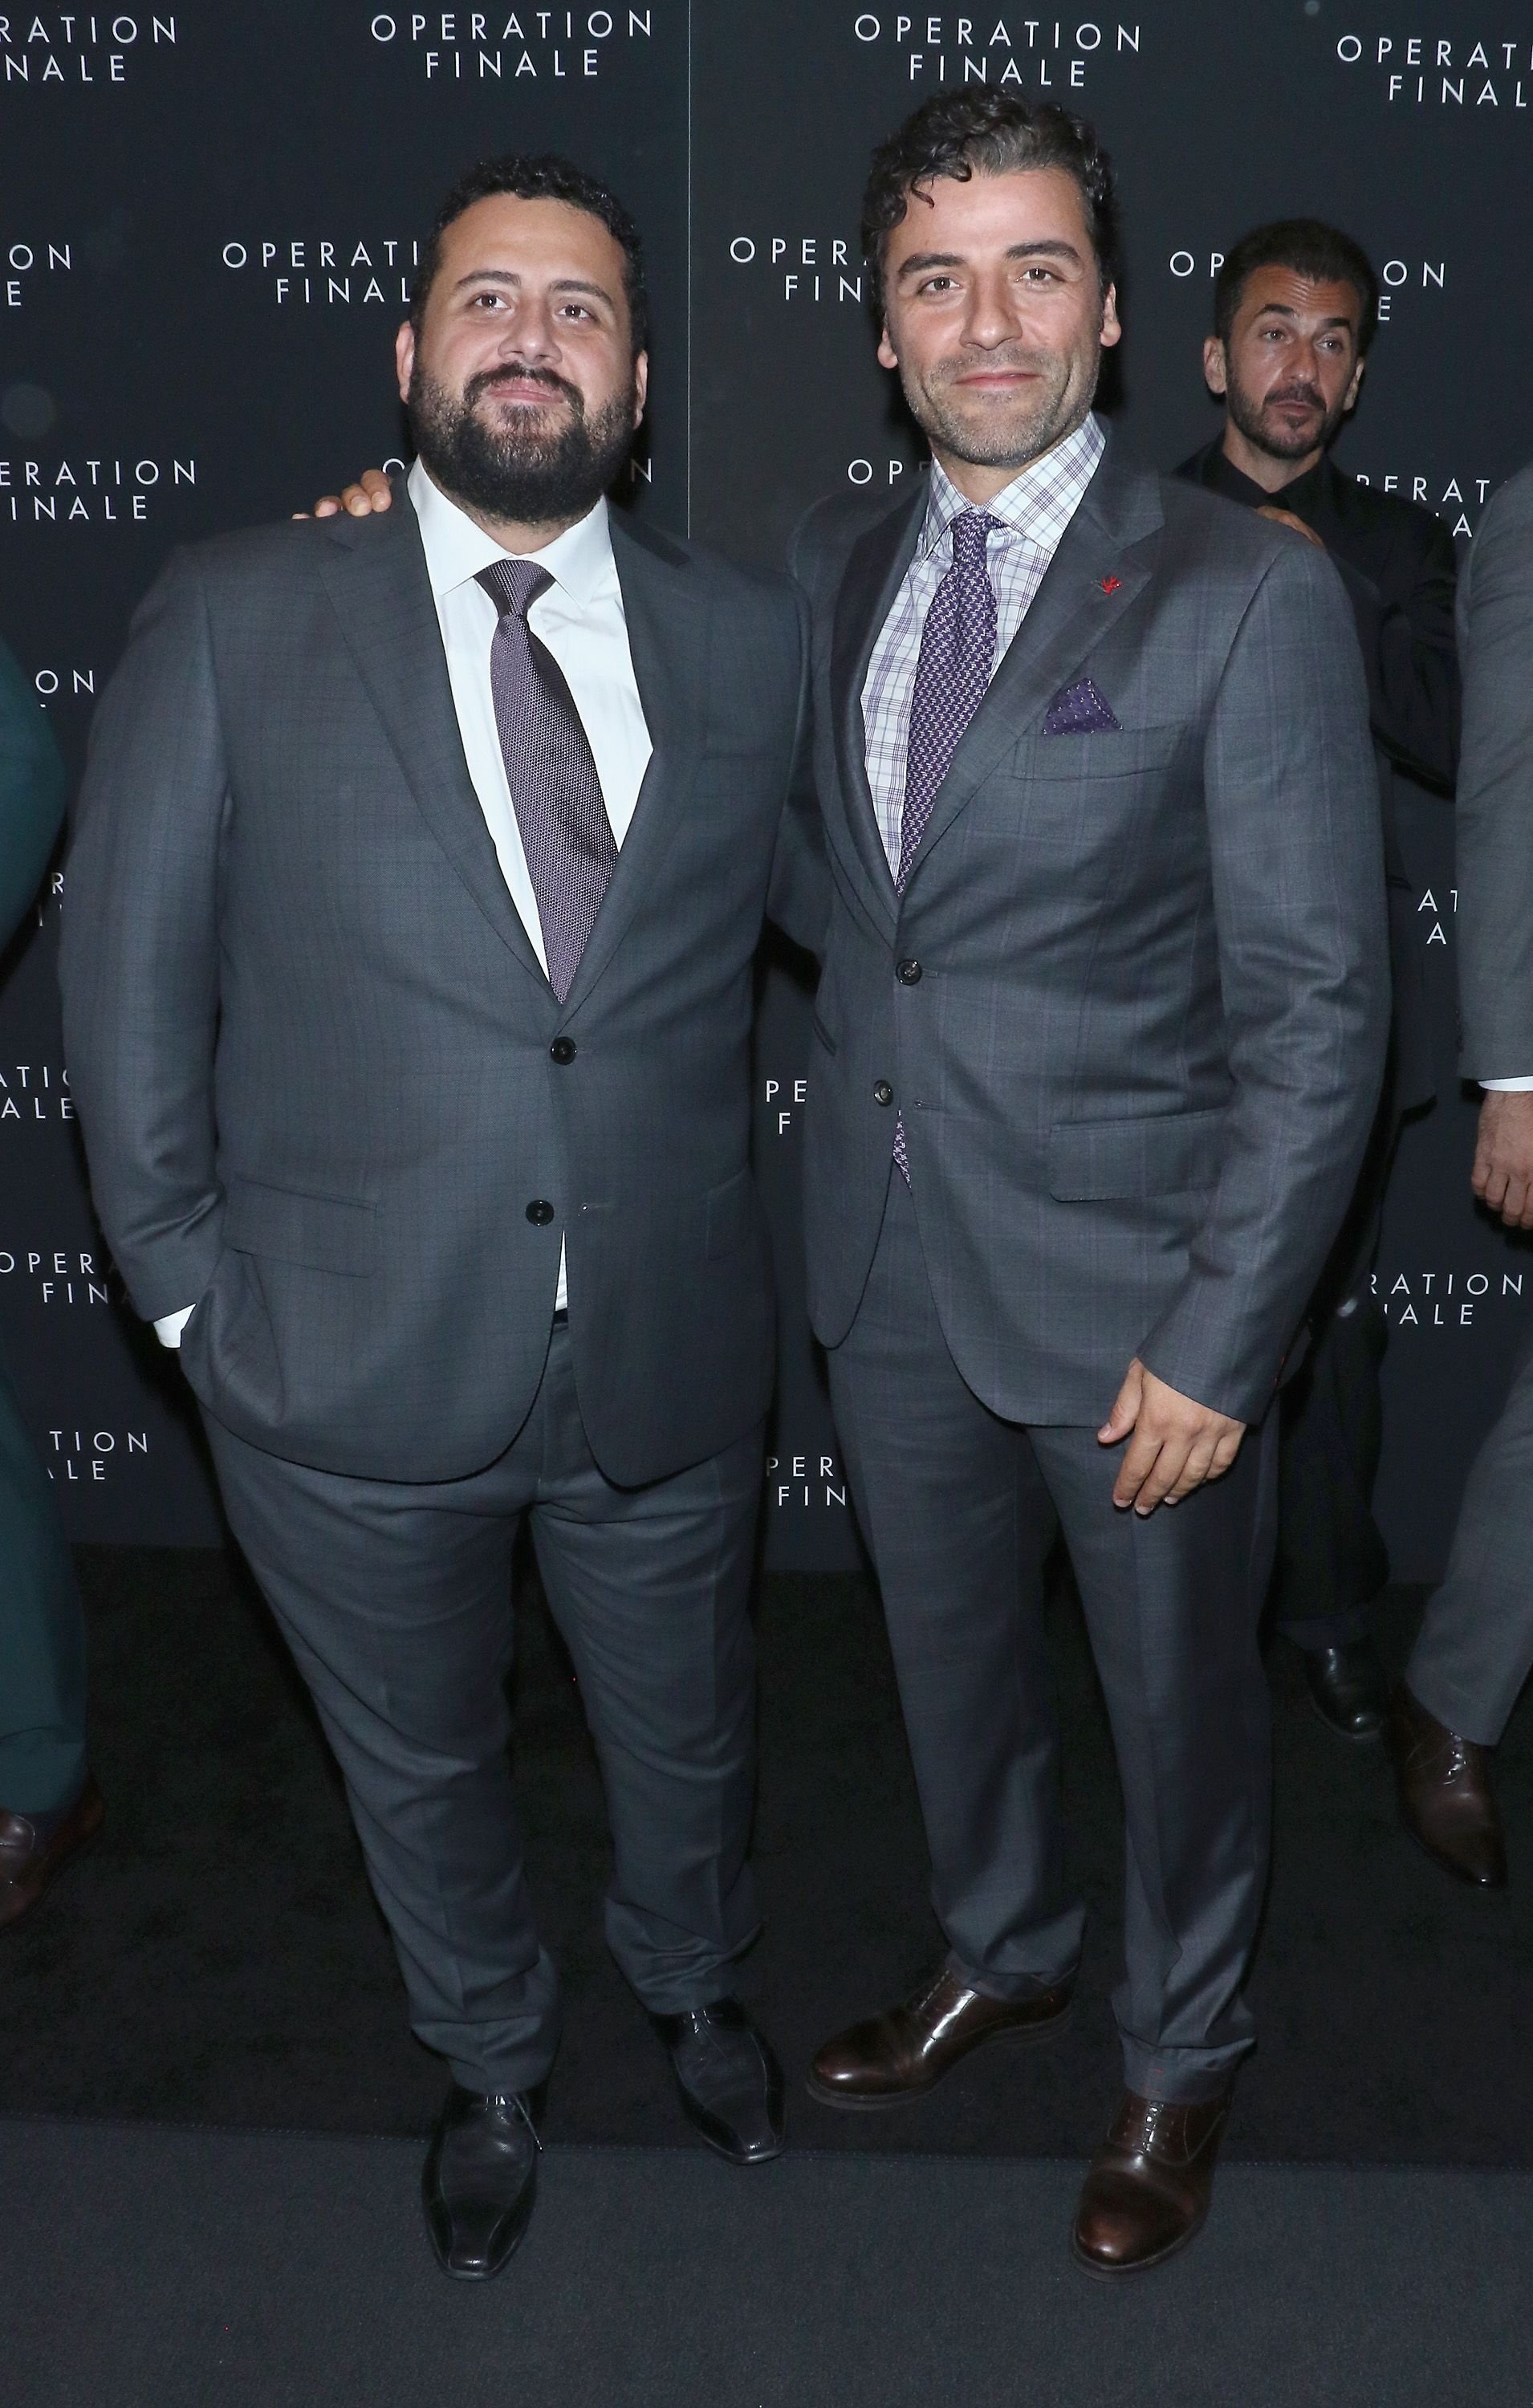 Michael Benjamin Hernandez and Oscar Isaac during the "Operation Finale" New York premiere at Walter Reade Theater on August 16, 2018, in New York City. | Source: Getty Images